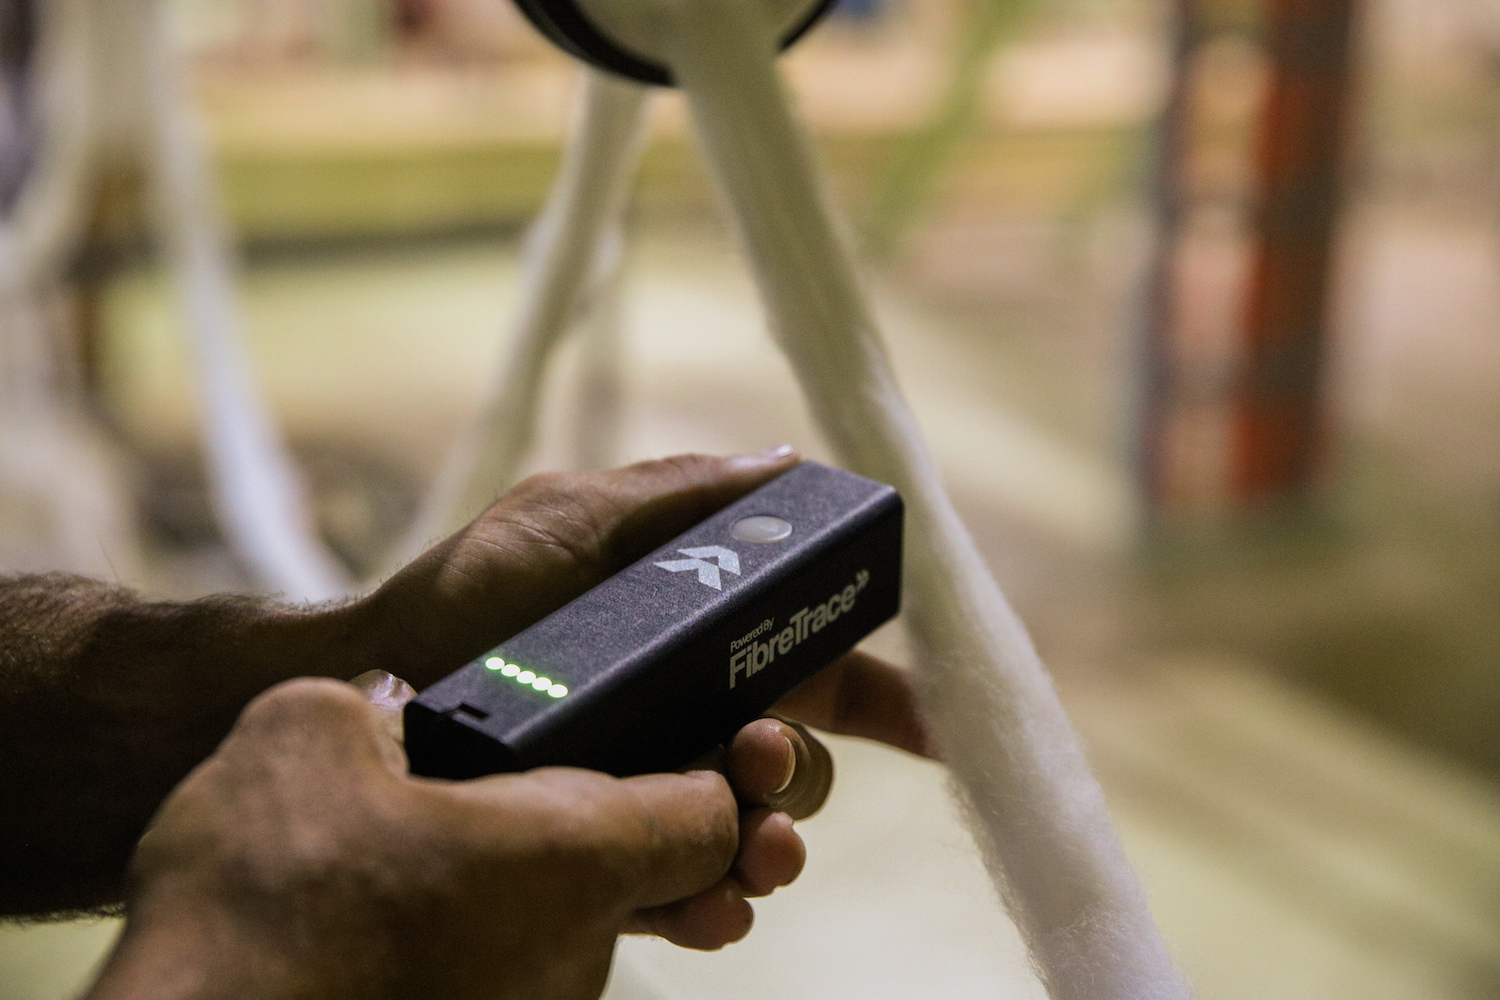 Proprietary handheld Fibretrace Bluetooth Scanner that identifies and quantifies pigments in fibre, yarn, fabric and finished goods that send encrypted data into secure blockchain and software that was specifically designed and engineered for the textile and apparel supply chain. © Fibretrace